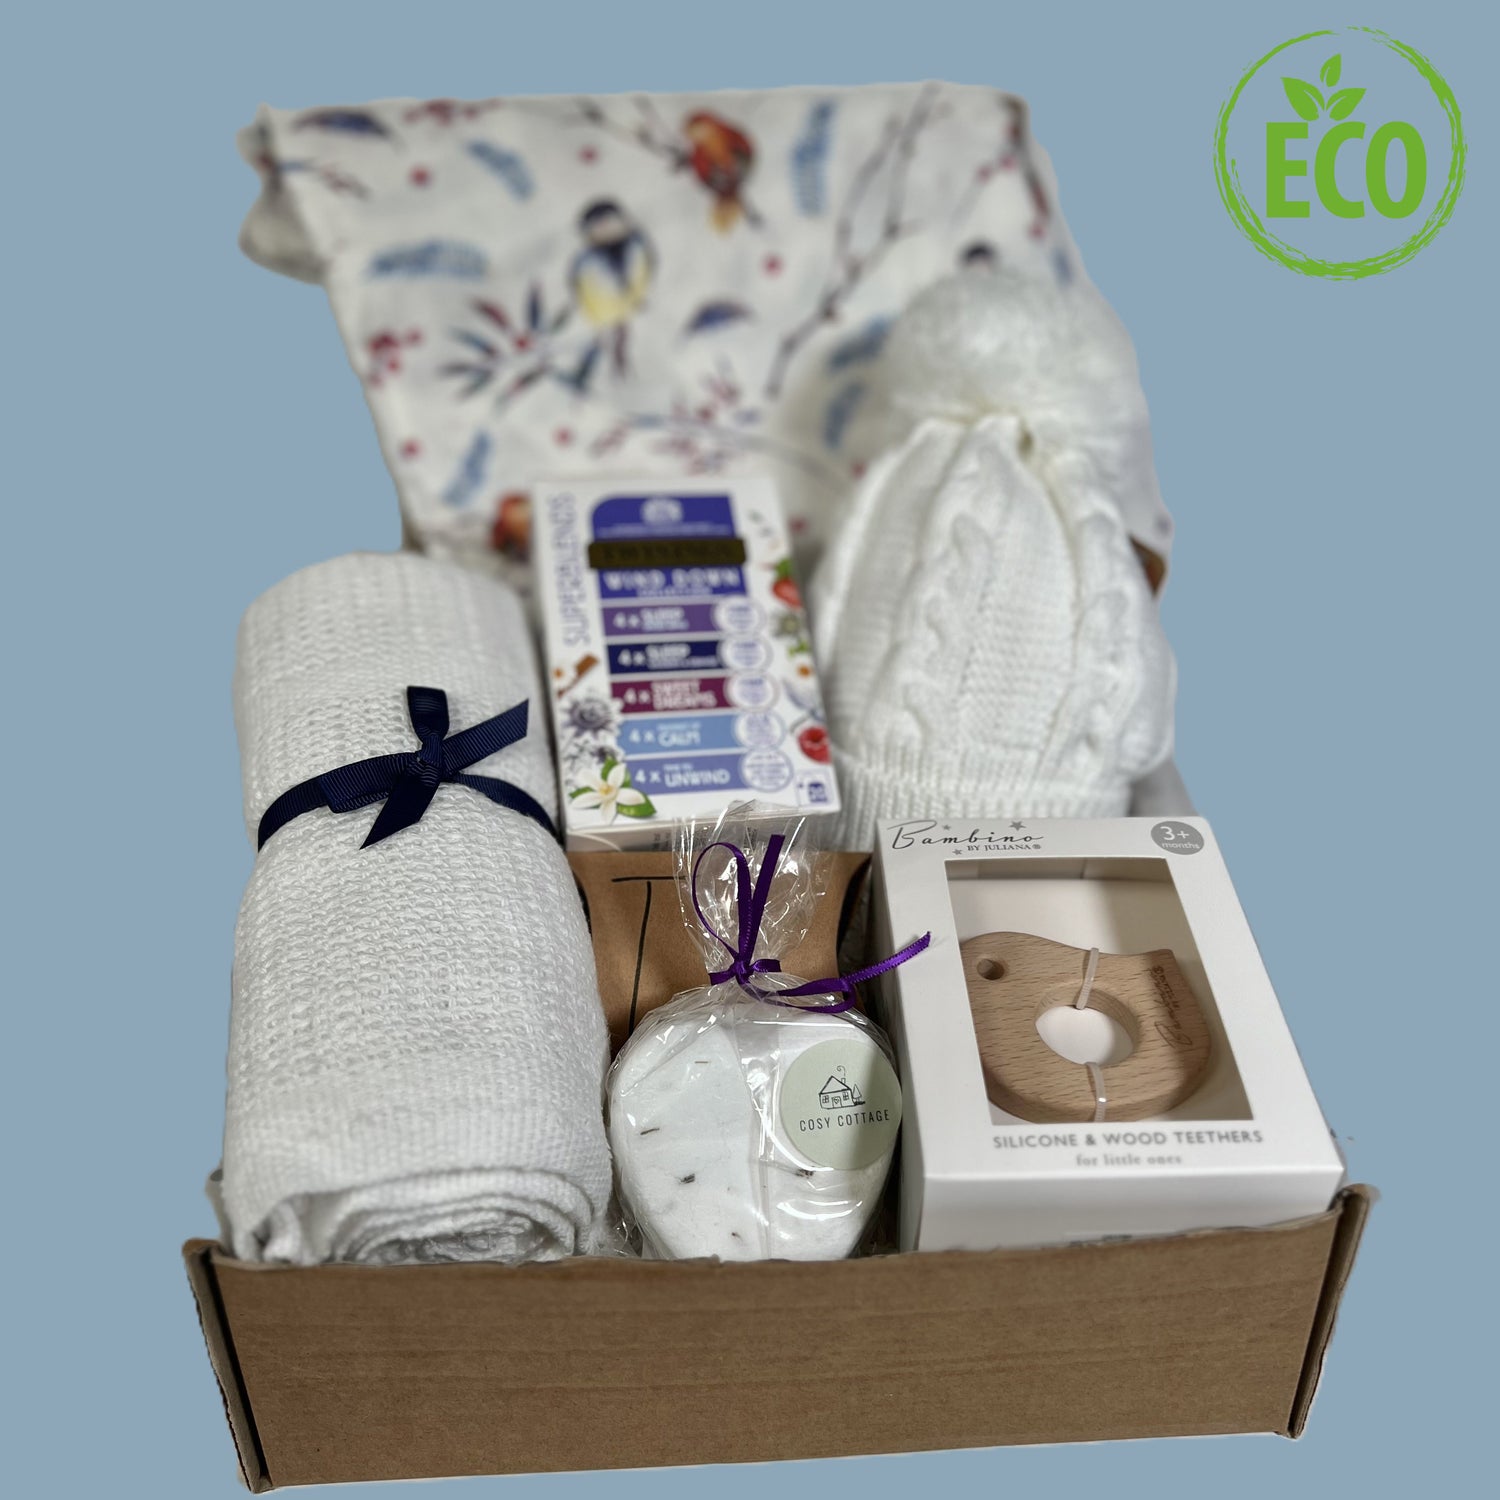 Eco friendly newborn baby girl gift includes a large whie baby muslin with a bird print, a white cottoncellular baby blanket, a baby pompom hat, a wooden bird baby teether, a heart shaped bath bomb and some sleepy tea for the new parents.